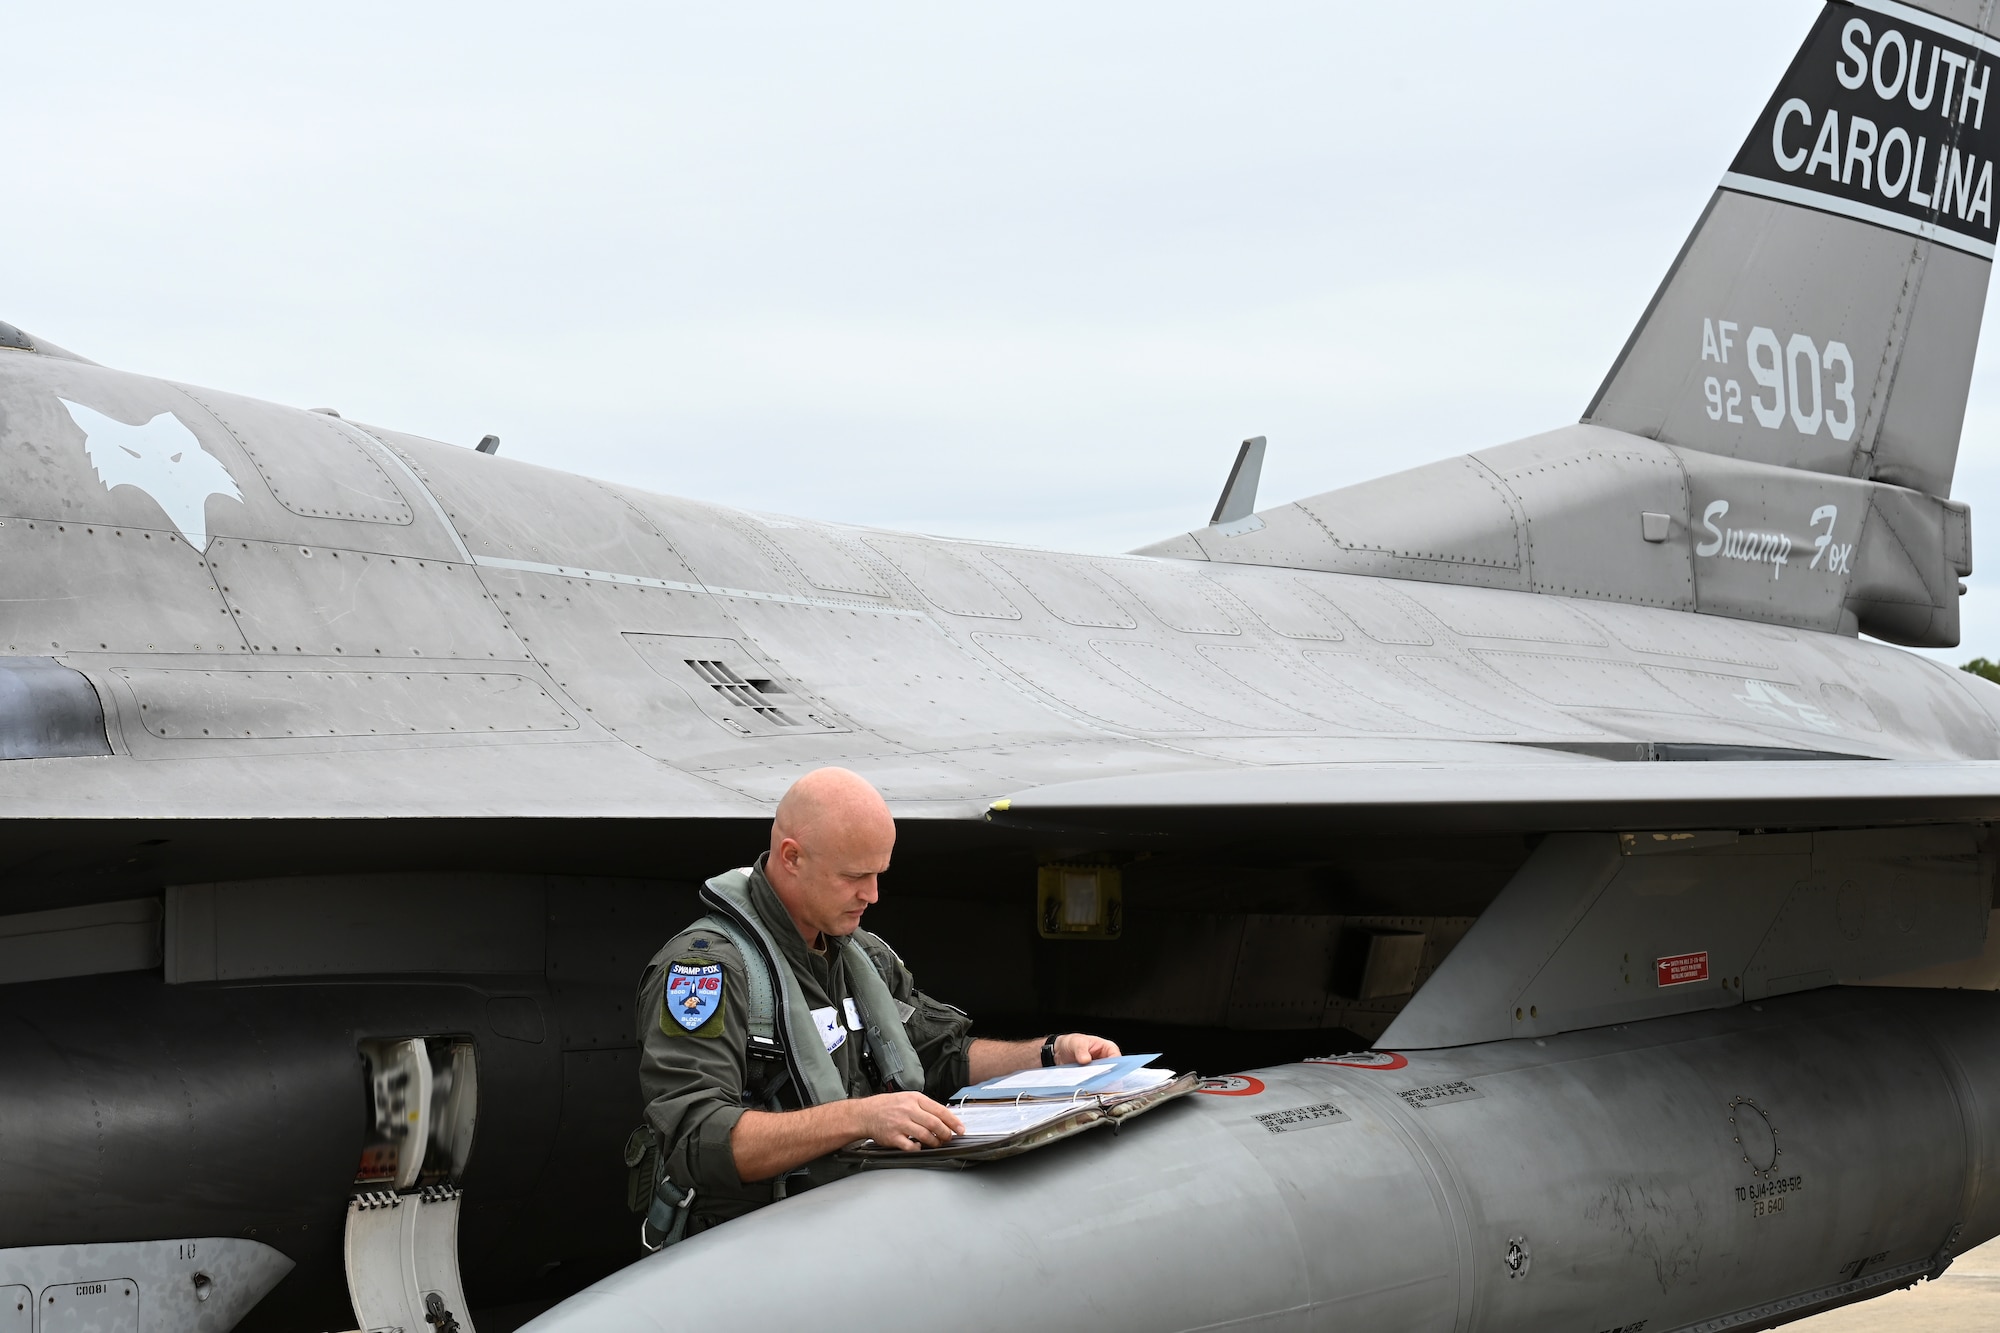 U.S. Air Force Lt. Col. David Anderson, 157th Fighter Squadron pilot, checks aircraft maintenance records as he prepares an F-16 fighter jet from the South Carolina Air National Guard’s 169th Fighter Wing to depart Columbia Metropolitan Airport in West Columbia, South Carolina, to an alternate airfield Sept. 29, 2022. The temporary relocation was a safety precaution ahead of the anticipated arrival of Hurricane Ian.